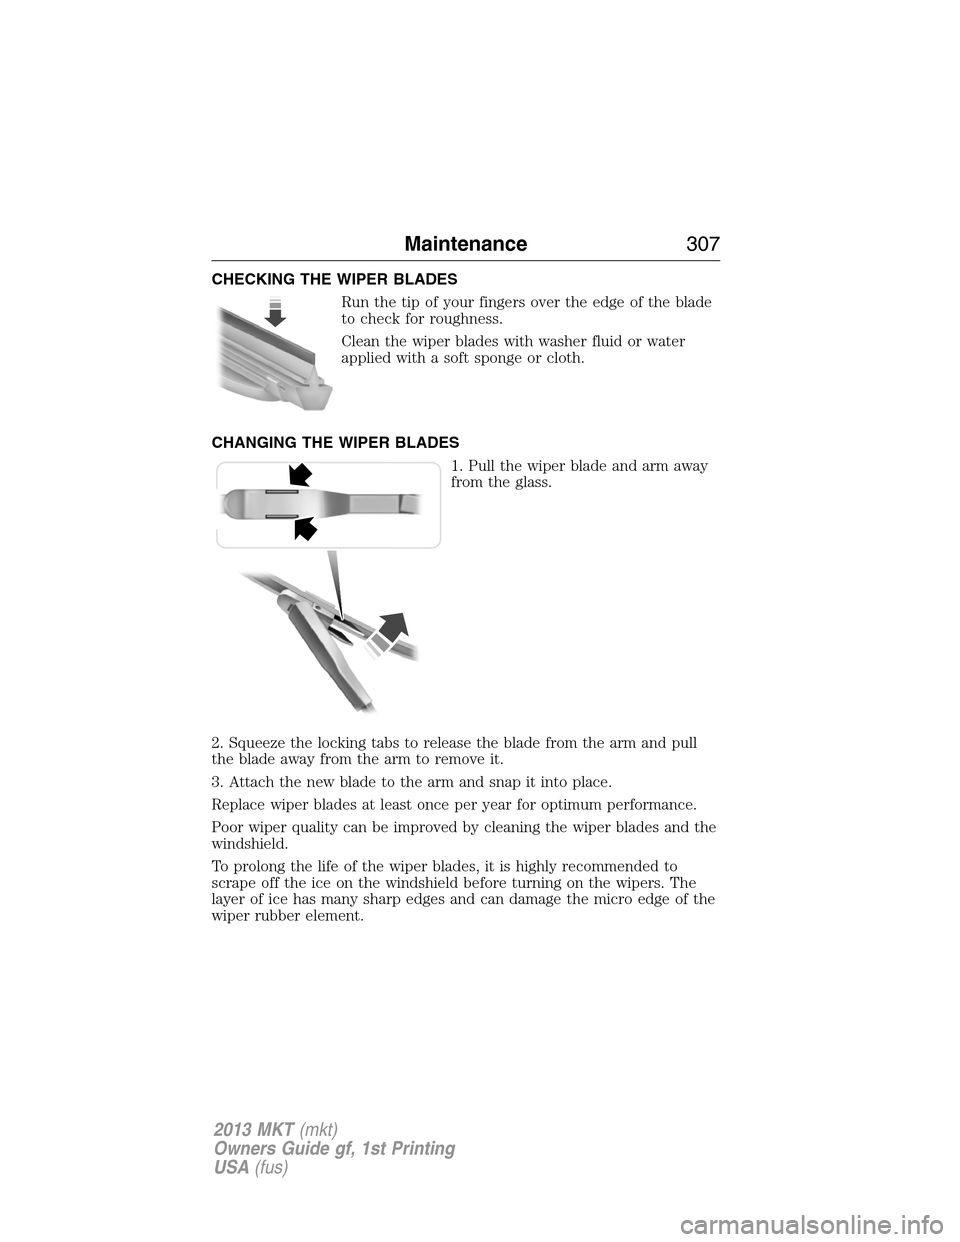 LINCOLN MKT 2013 Service Manual CHECKING THE WIPER BLADES
Run the tip of your fingers over the edge of the blade
to check for roughness.
Clean the wiper blades with washer fluid or water
applied with a soft sponge or cloth.
CHANGING